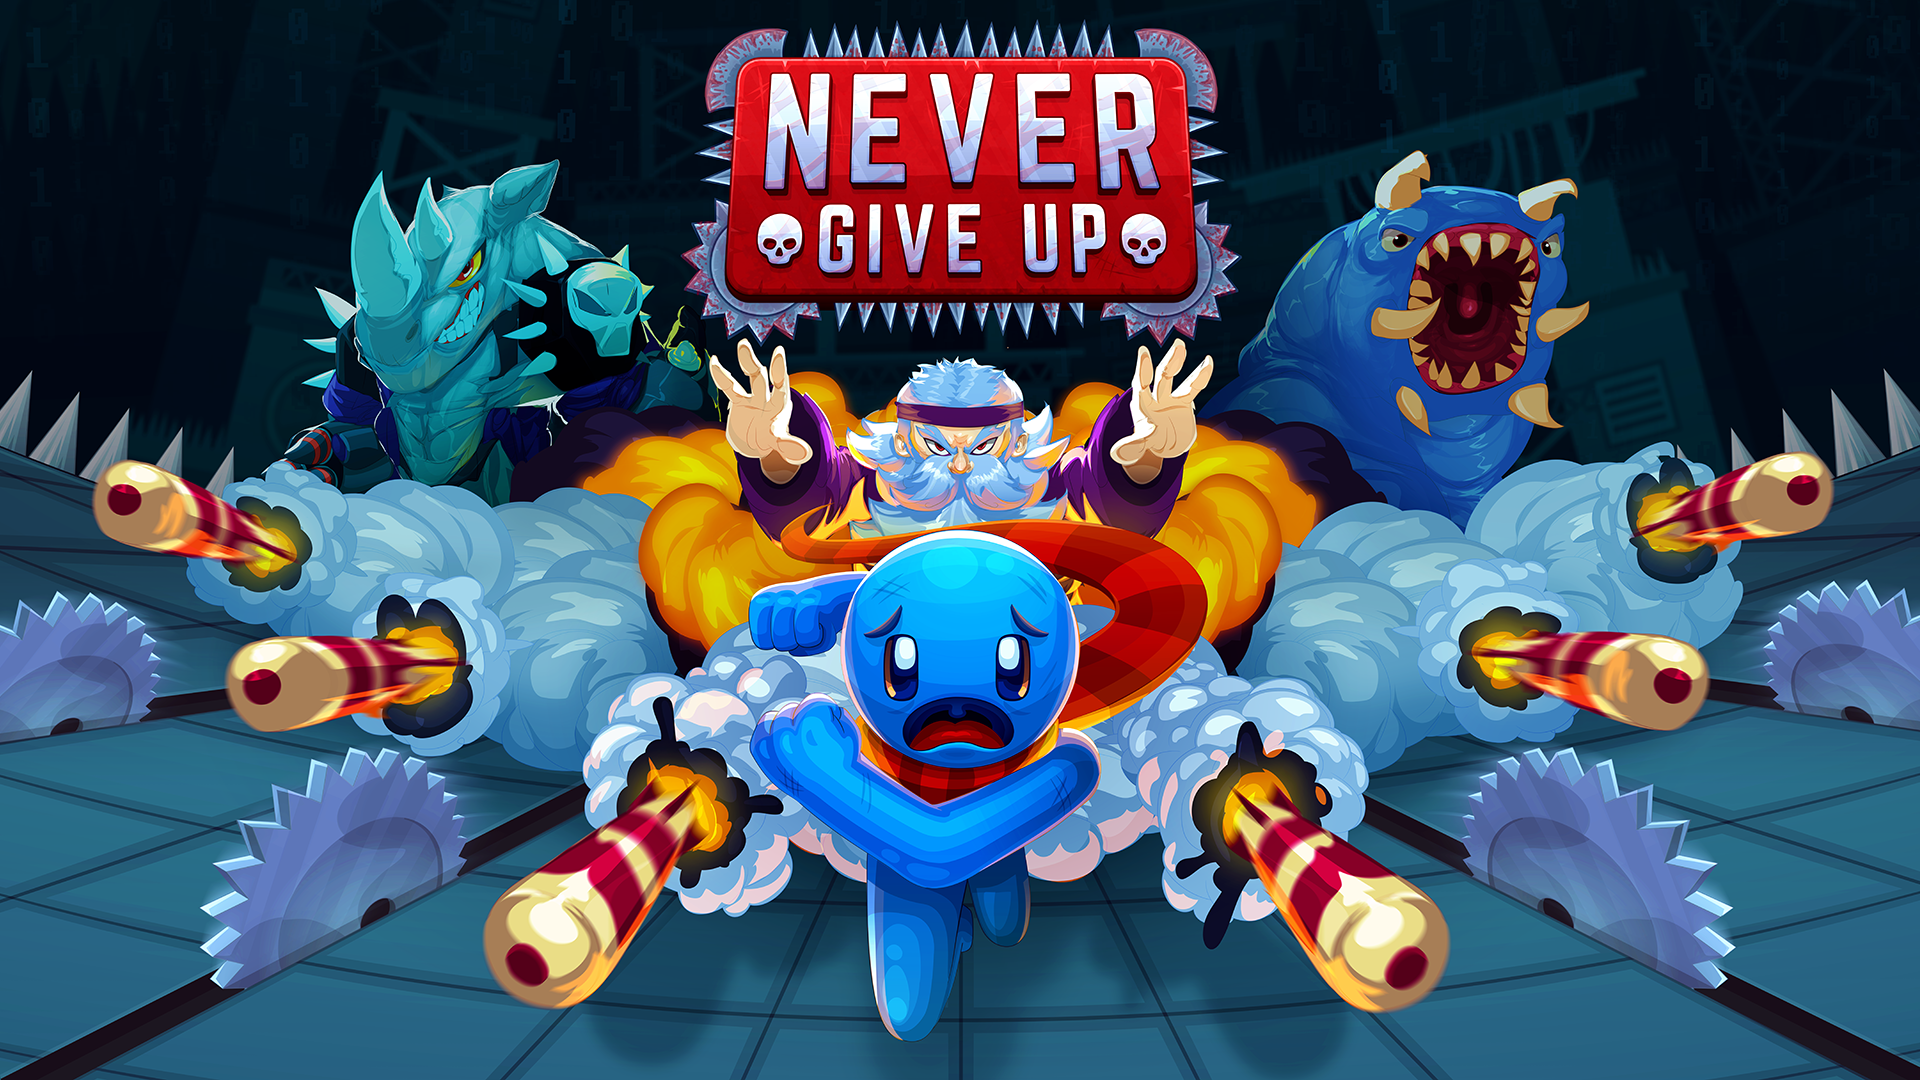 Give my game. Never give up игра. Massive Monster игры. Give it up игра. Never off игра.